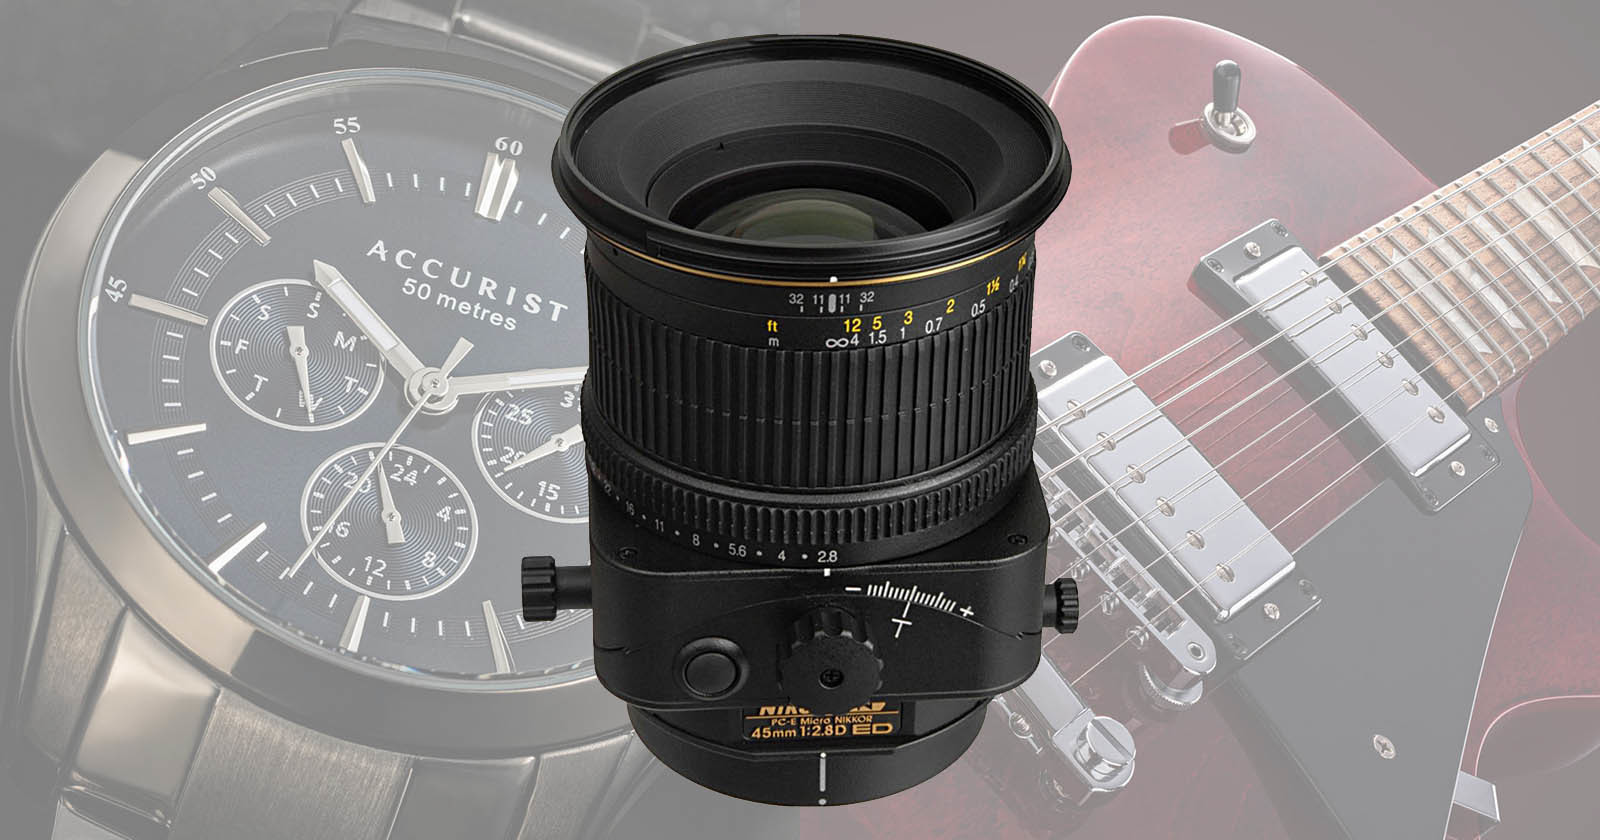  why use tilt shift lenses product photography 